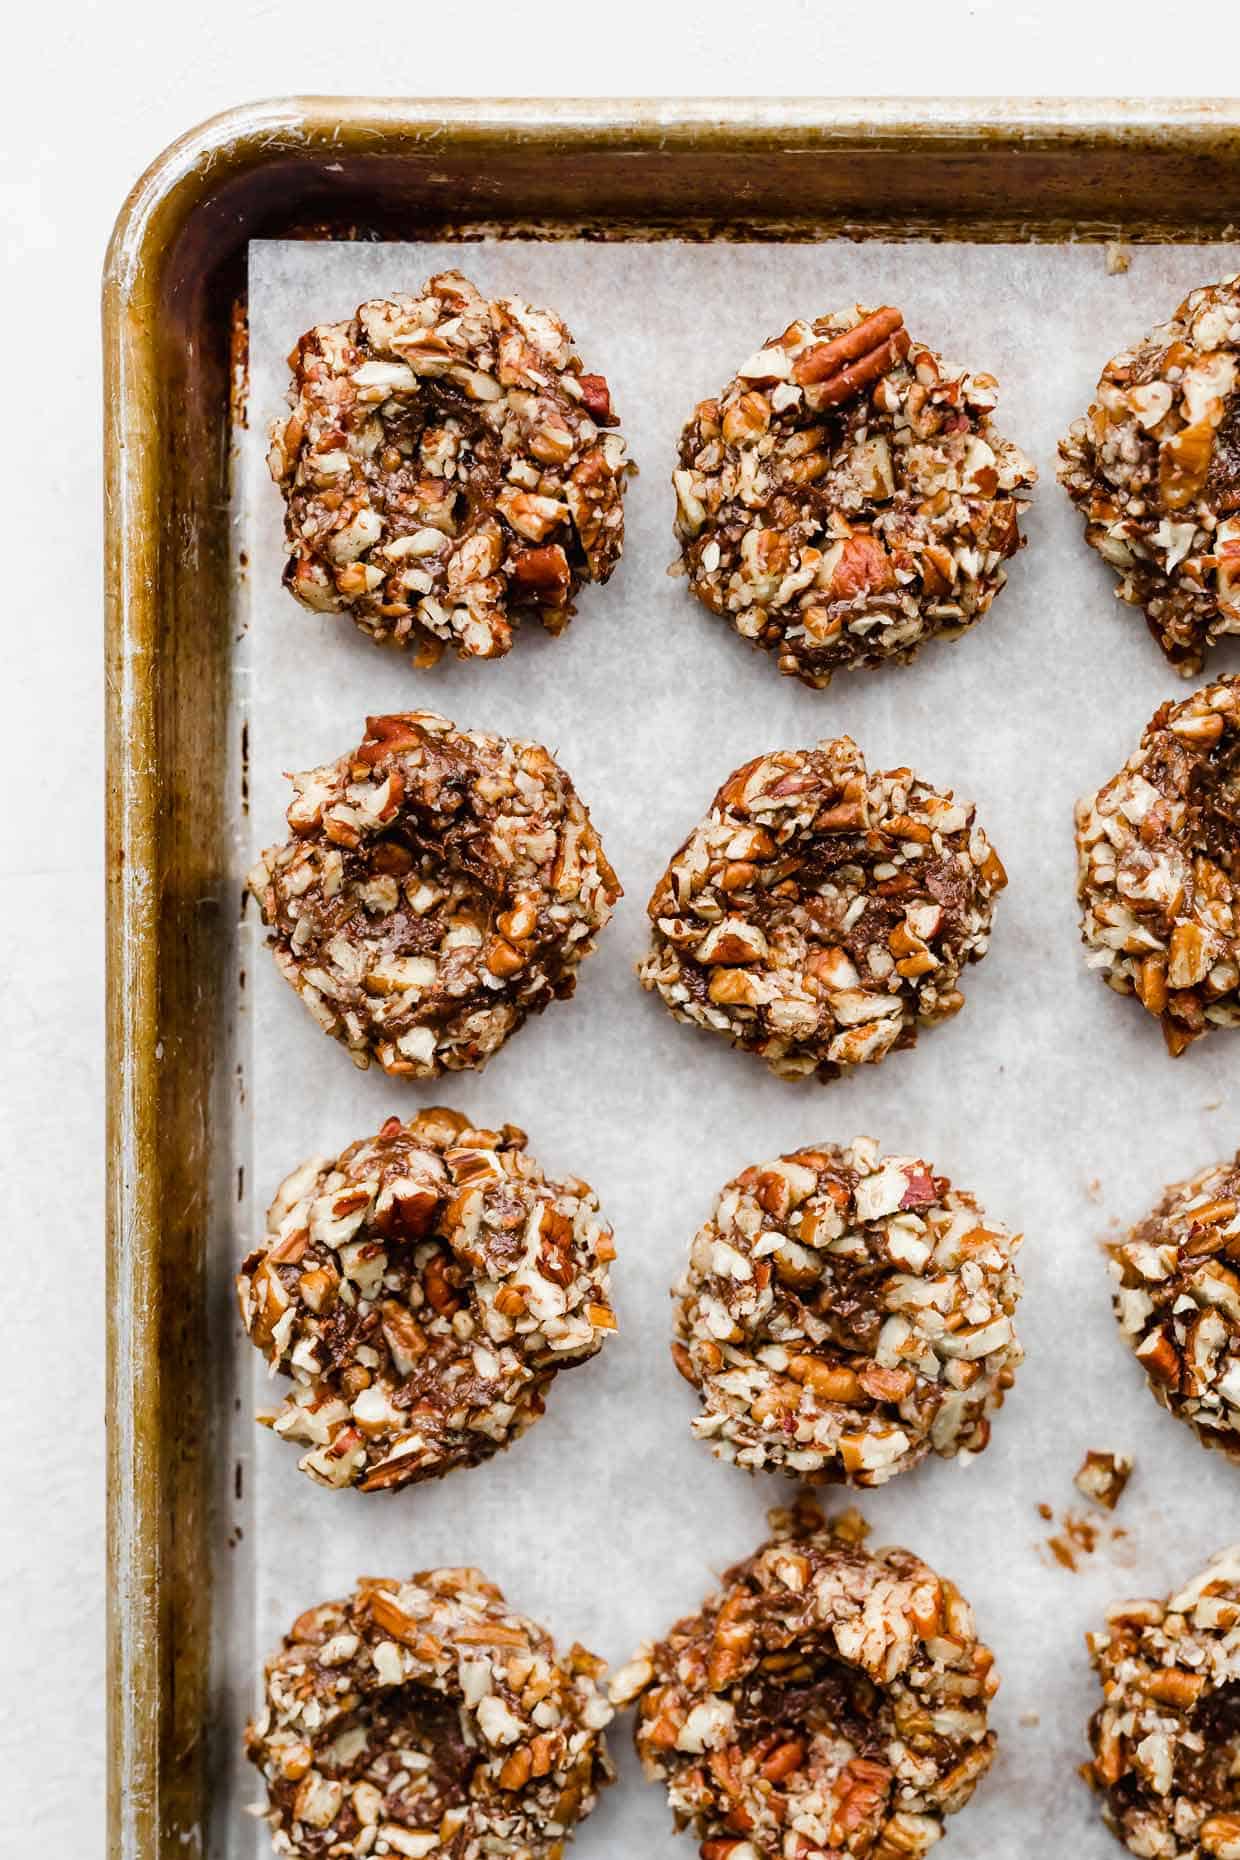 Pecan covered chocolate cookie dough balls with a thumbprint indentation in the center of each ball.